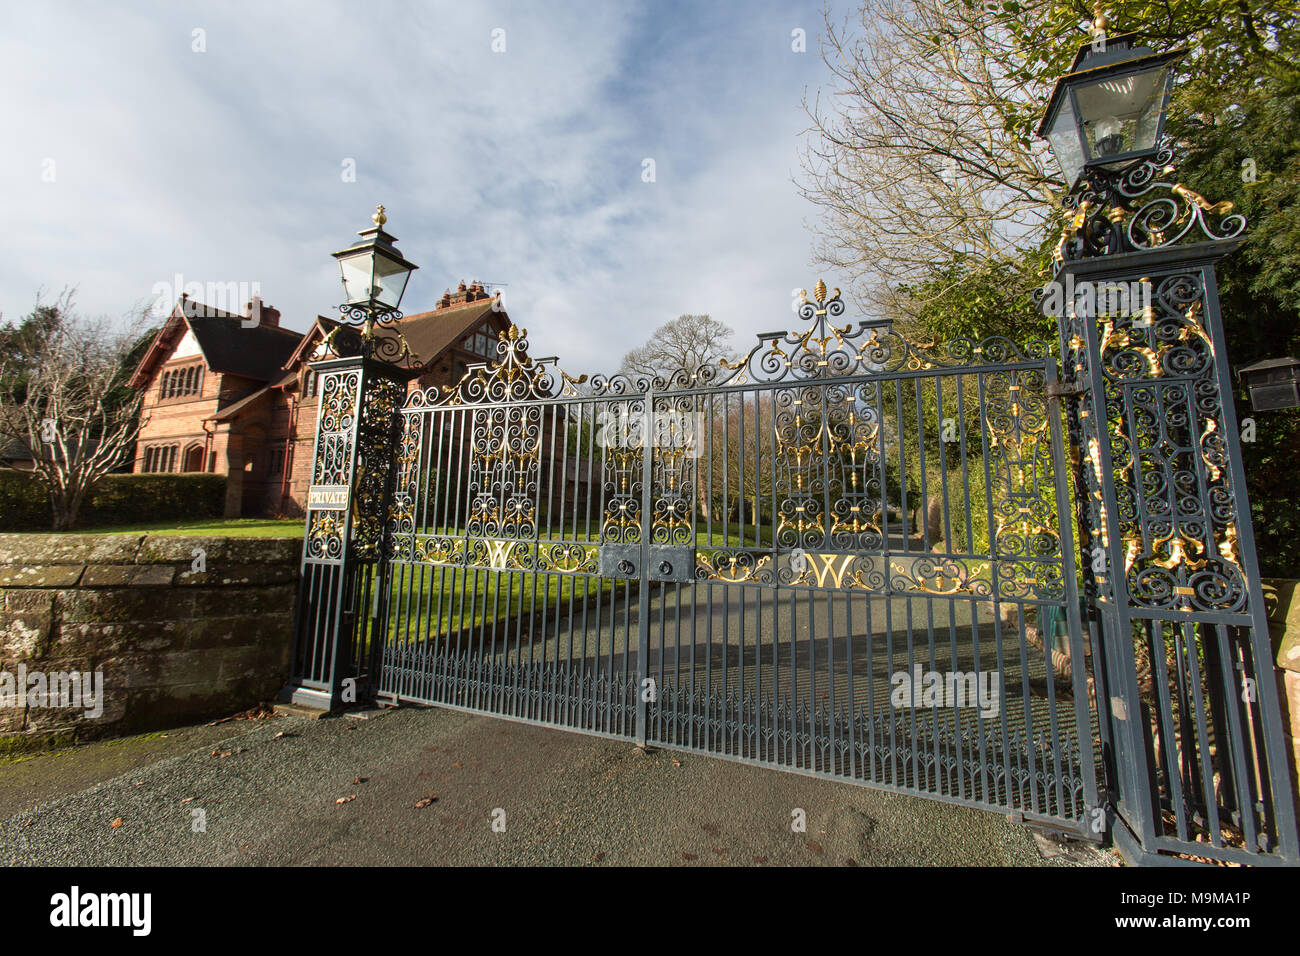 Village of Aldford, England. Picturesque view of the Aldford gated entrance to the Duke of Westminster’s Eaton Estate. Stock Photo